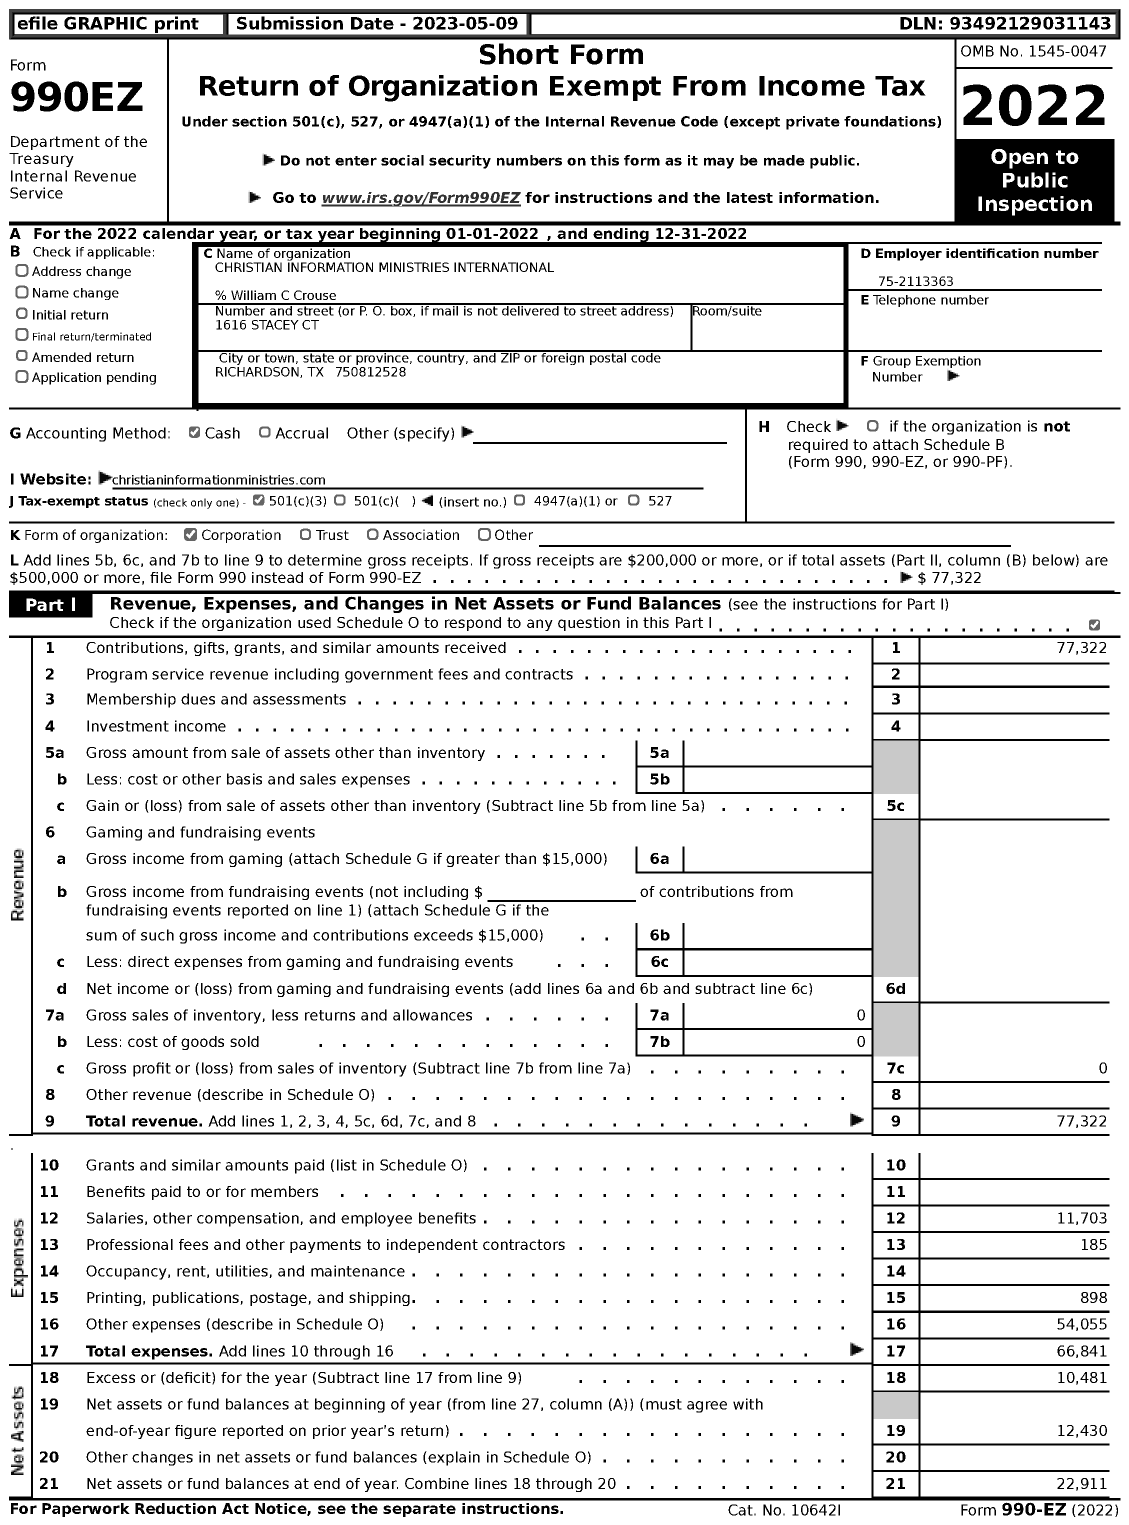 Image of first page of 2022 Form 990EZ for Christian Information Ministries International